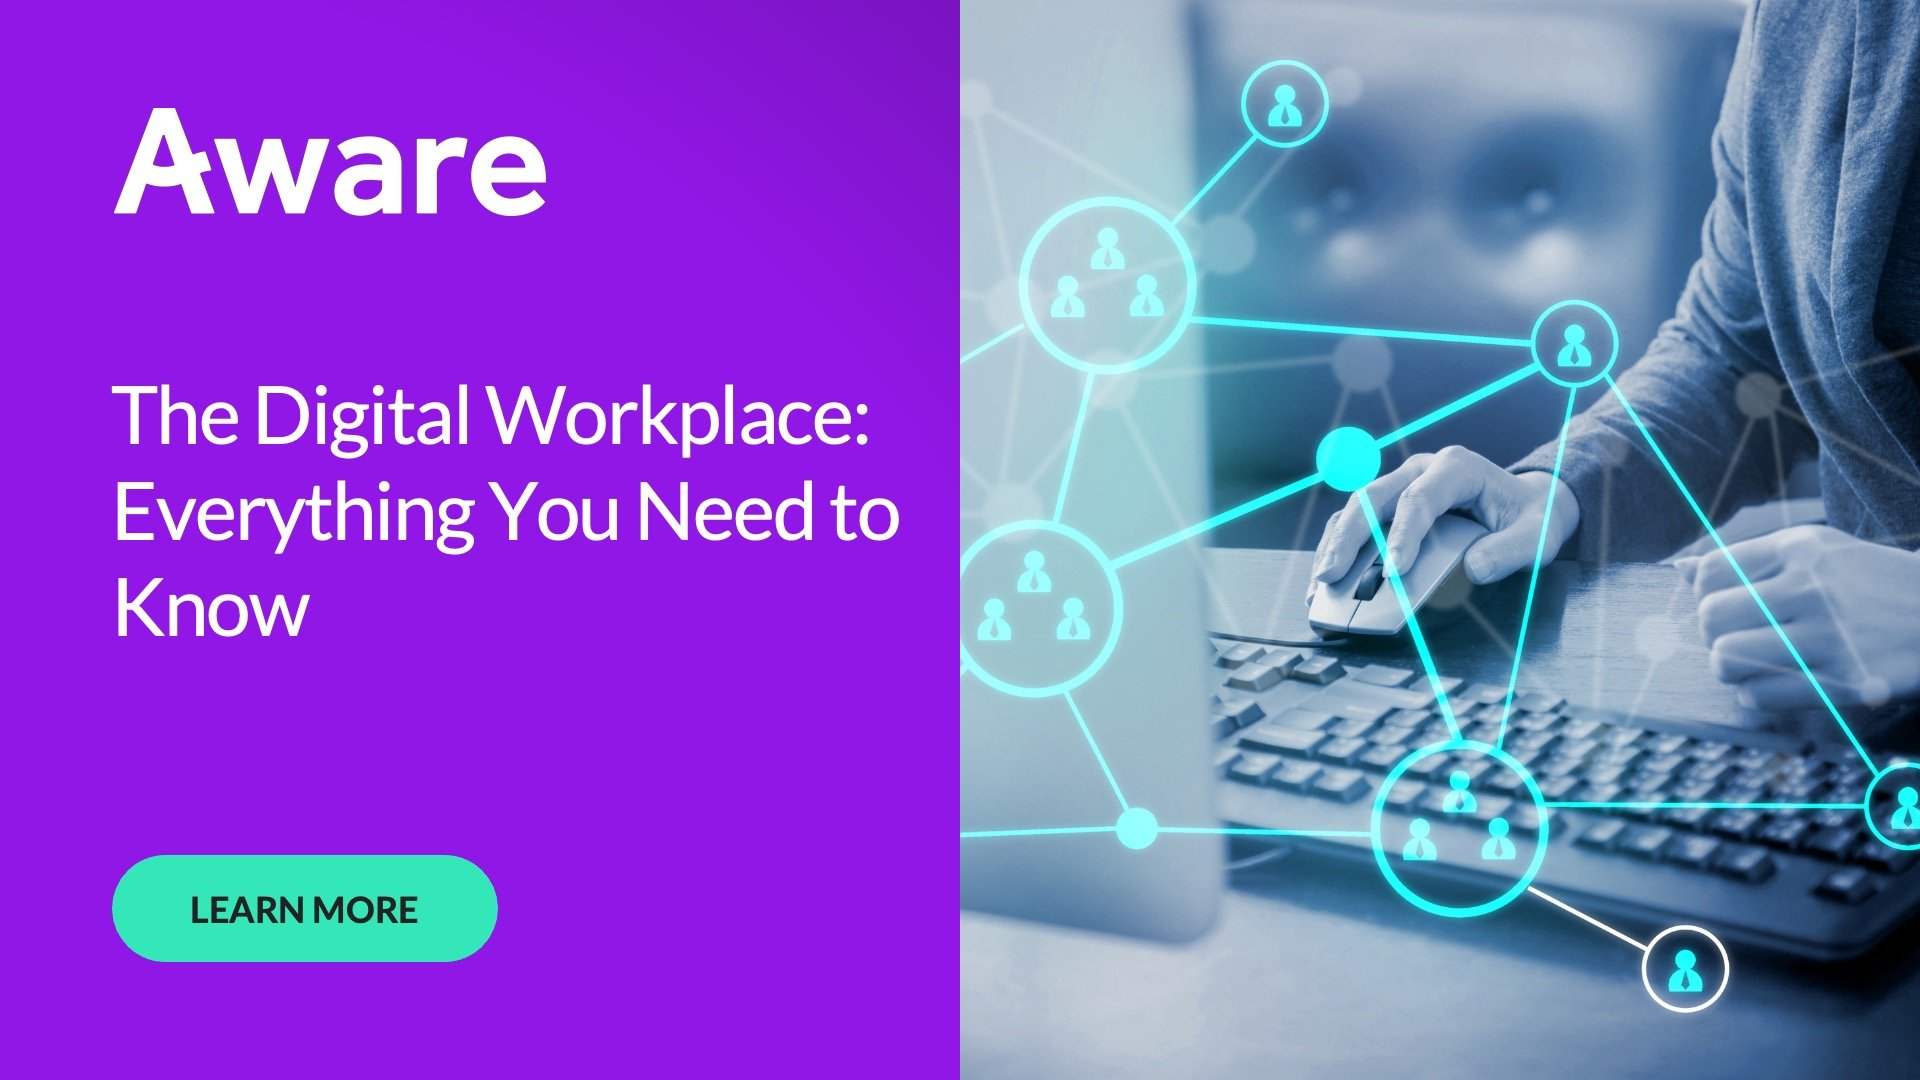 The Digital Workplace: Everything You Need to Know